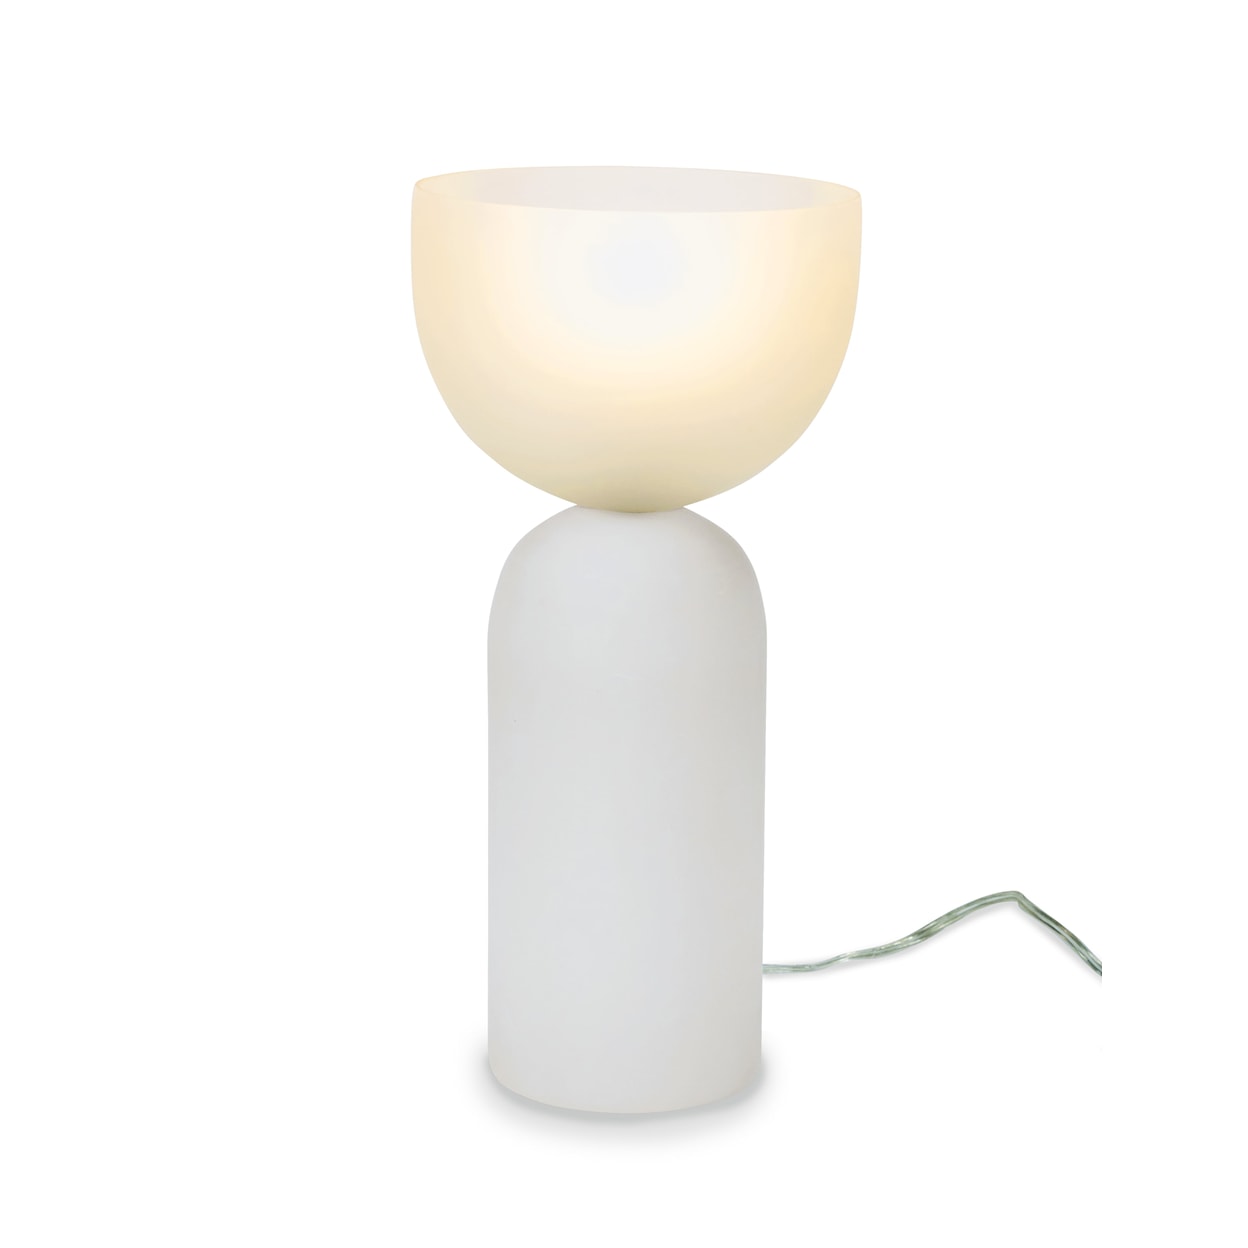 BOBO Intriguing Objects BOBO Intriguing Objects Wide Top Smooth White Luxury Lamp - Small